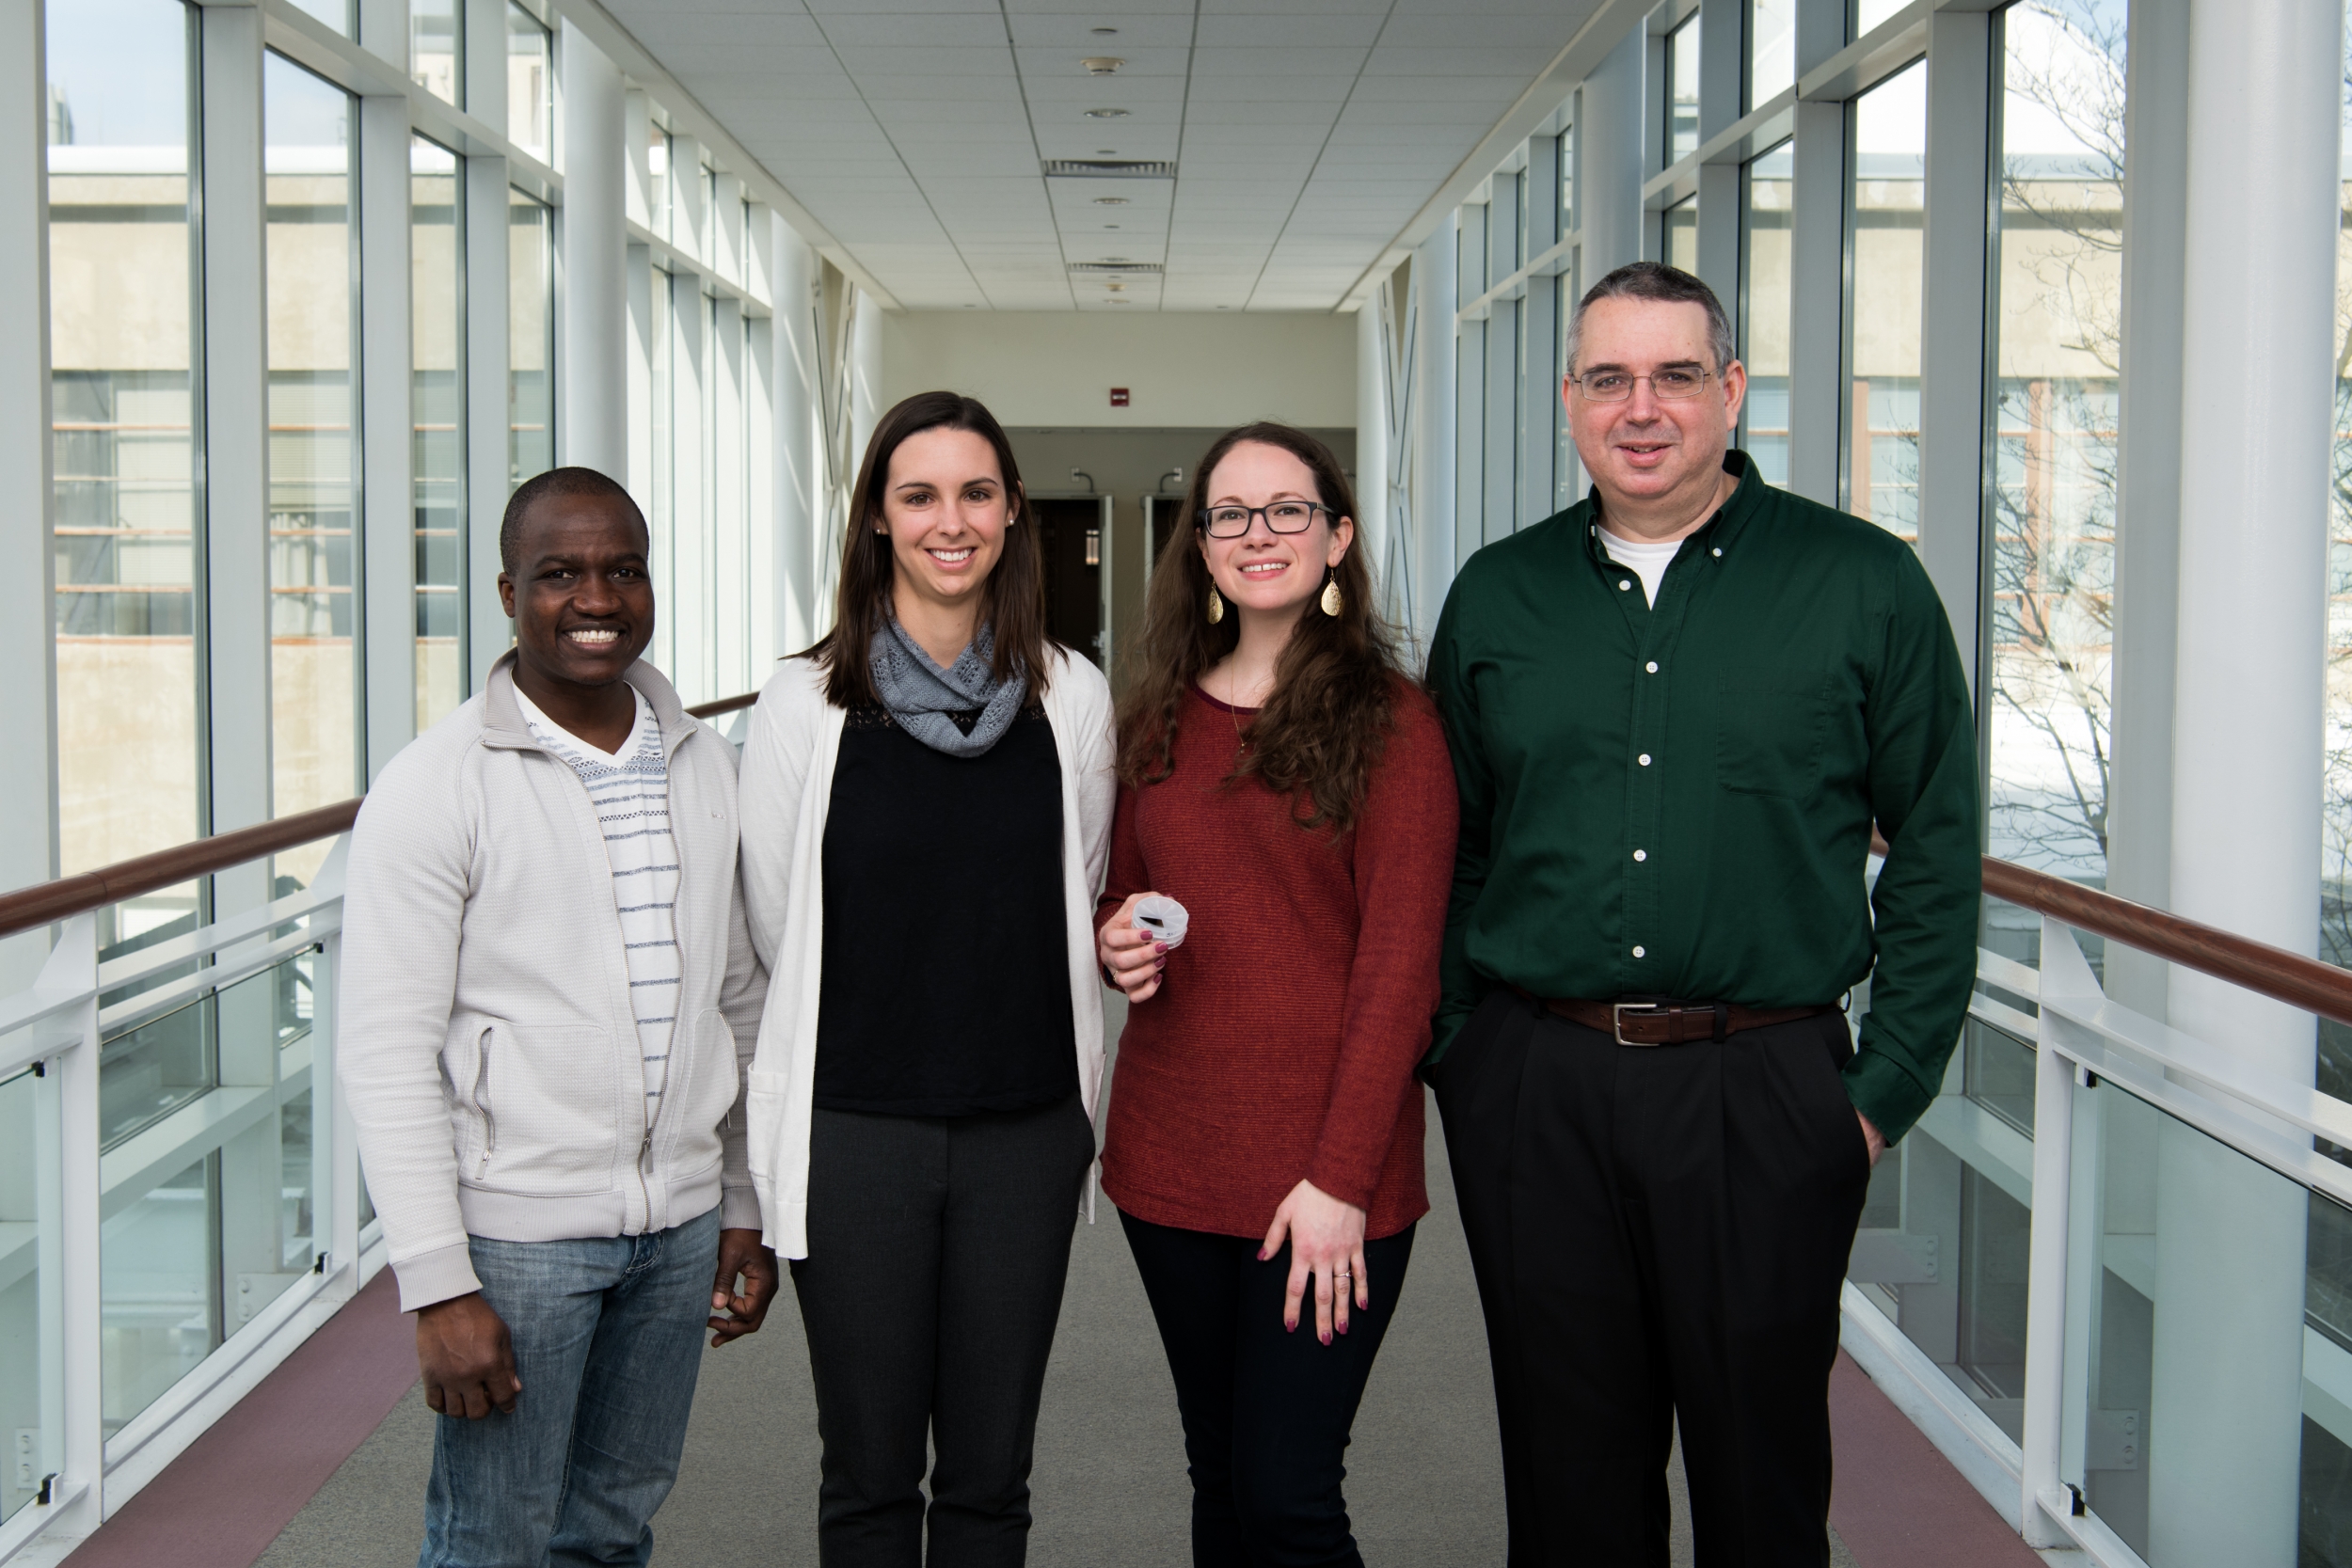 The team of four researchers pose for a group photo in a hallway